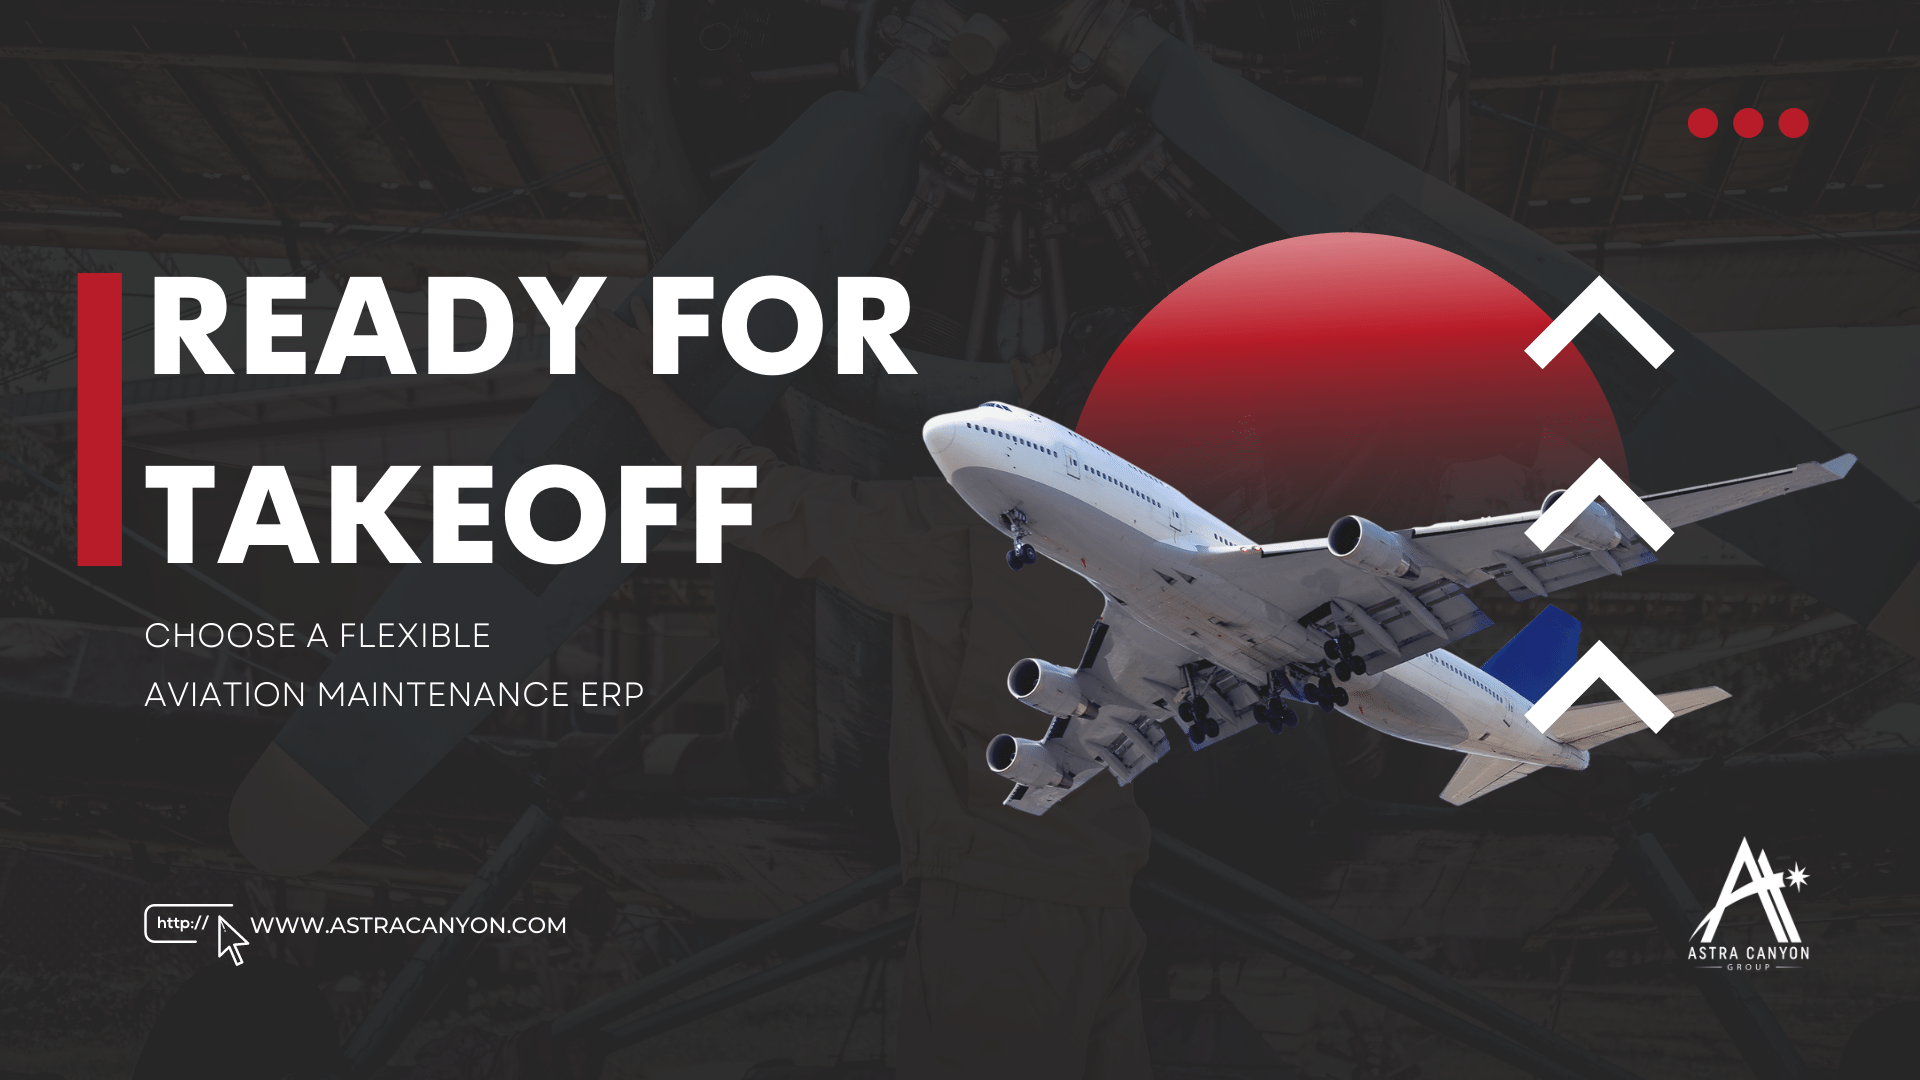 Aerospace ERP Buyers Guide: Choose an Aviation Maintenance ERP flexible enough to handle today’s challenges